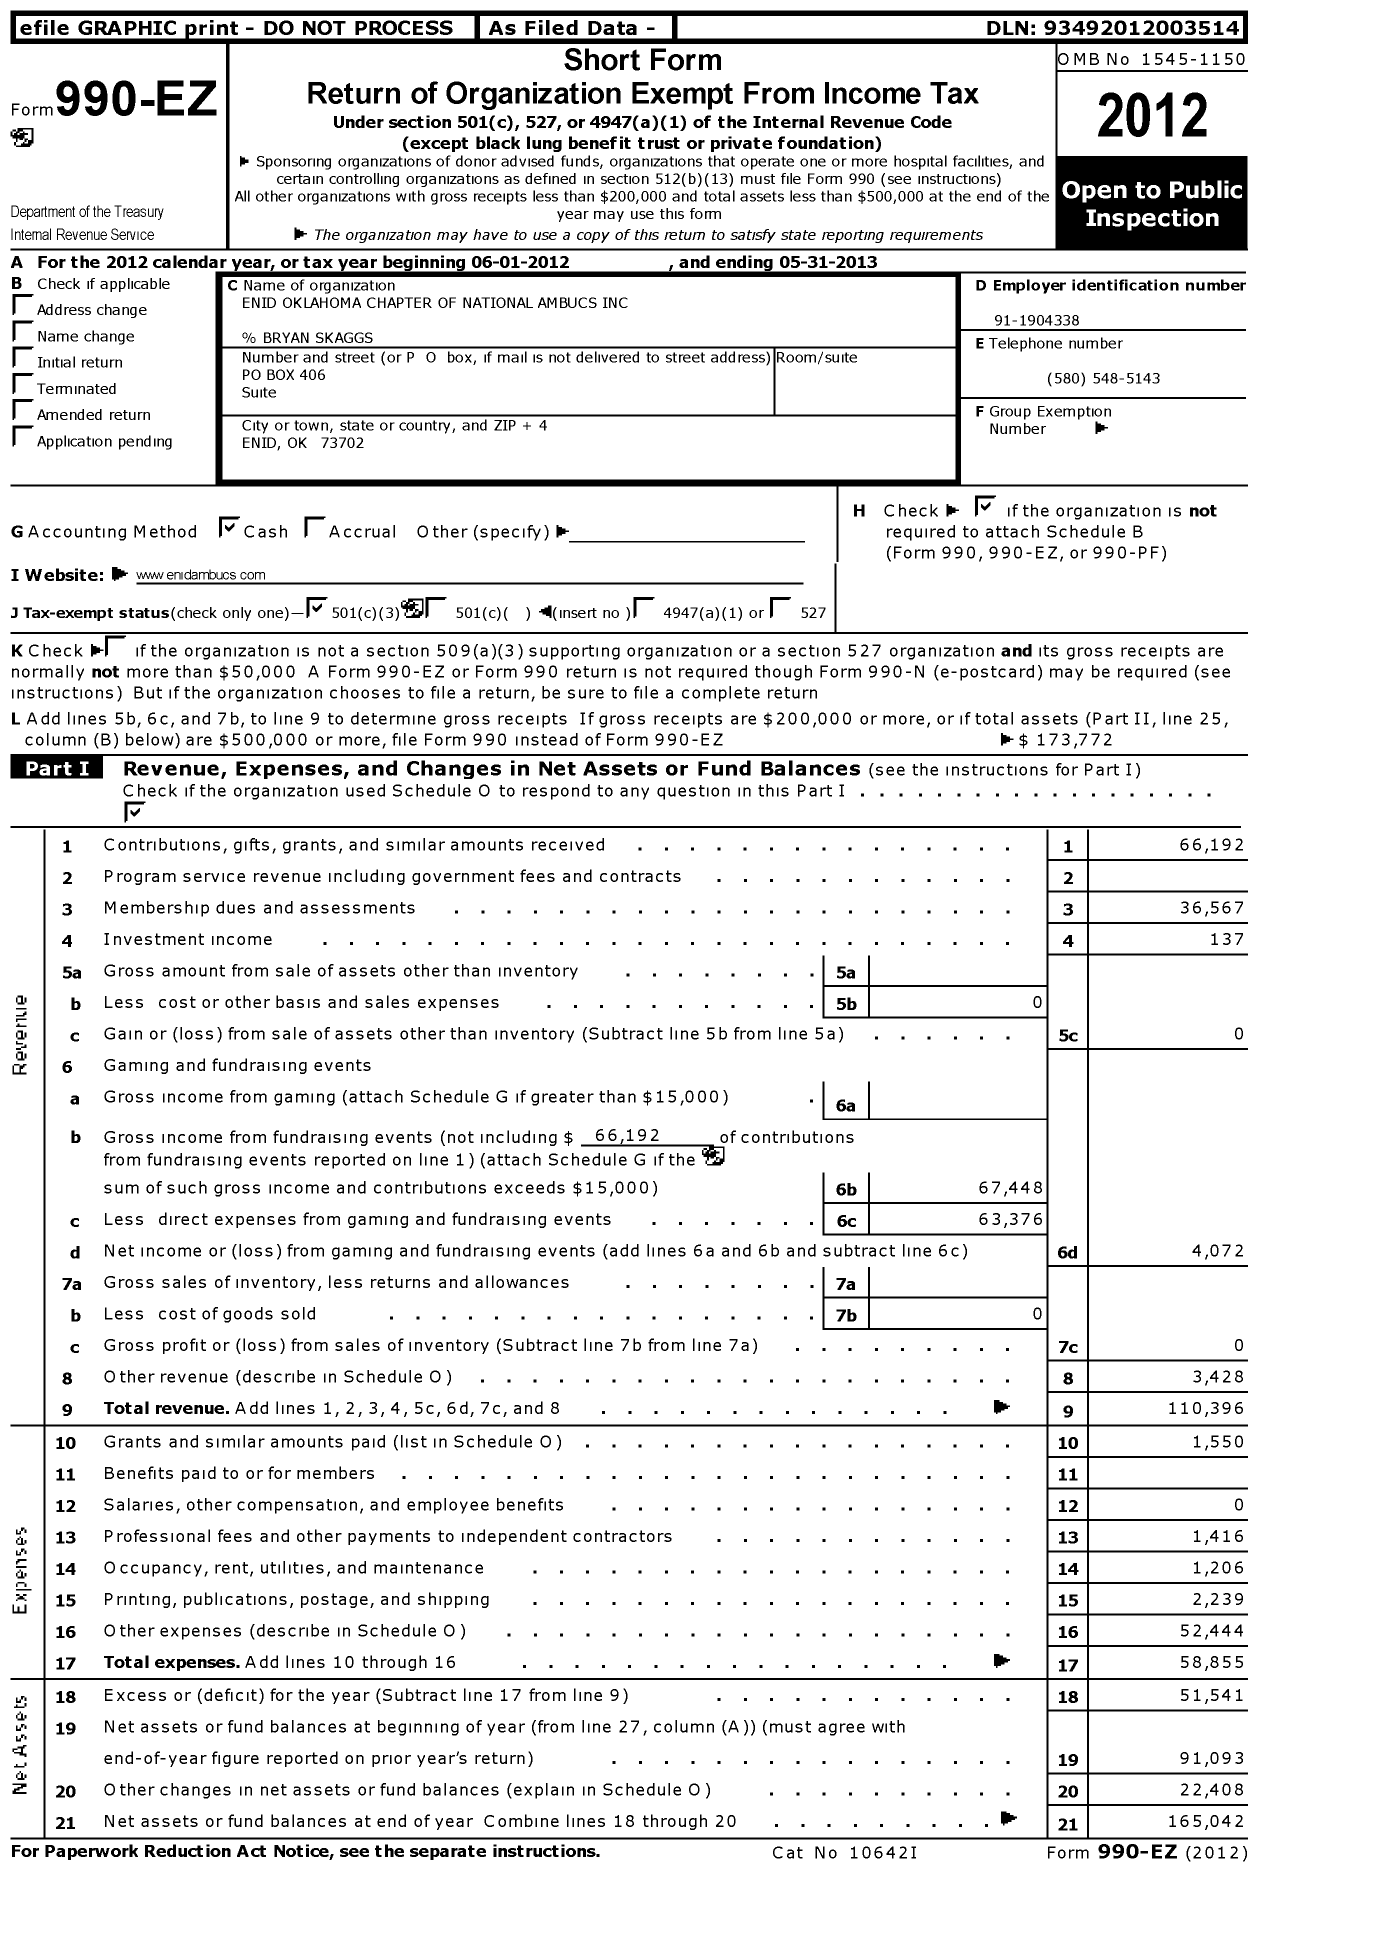 Image of first page of 2012 Form 990EZ for Enid Oklahoma Chapter of National Ambucs